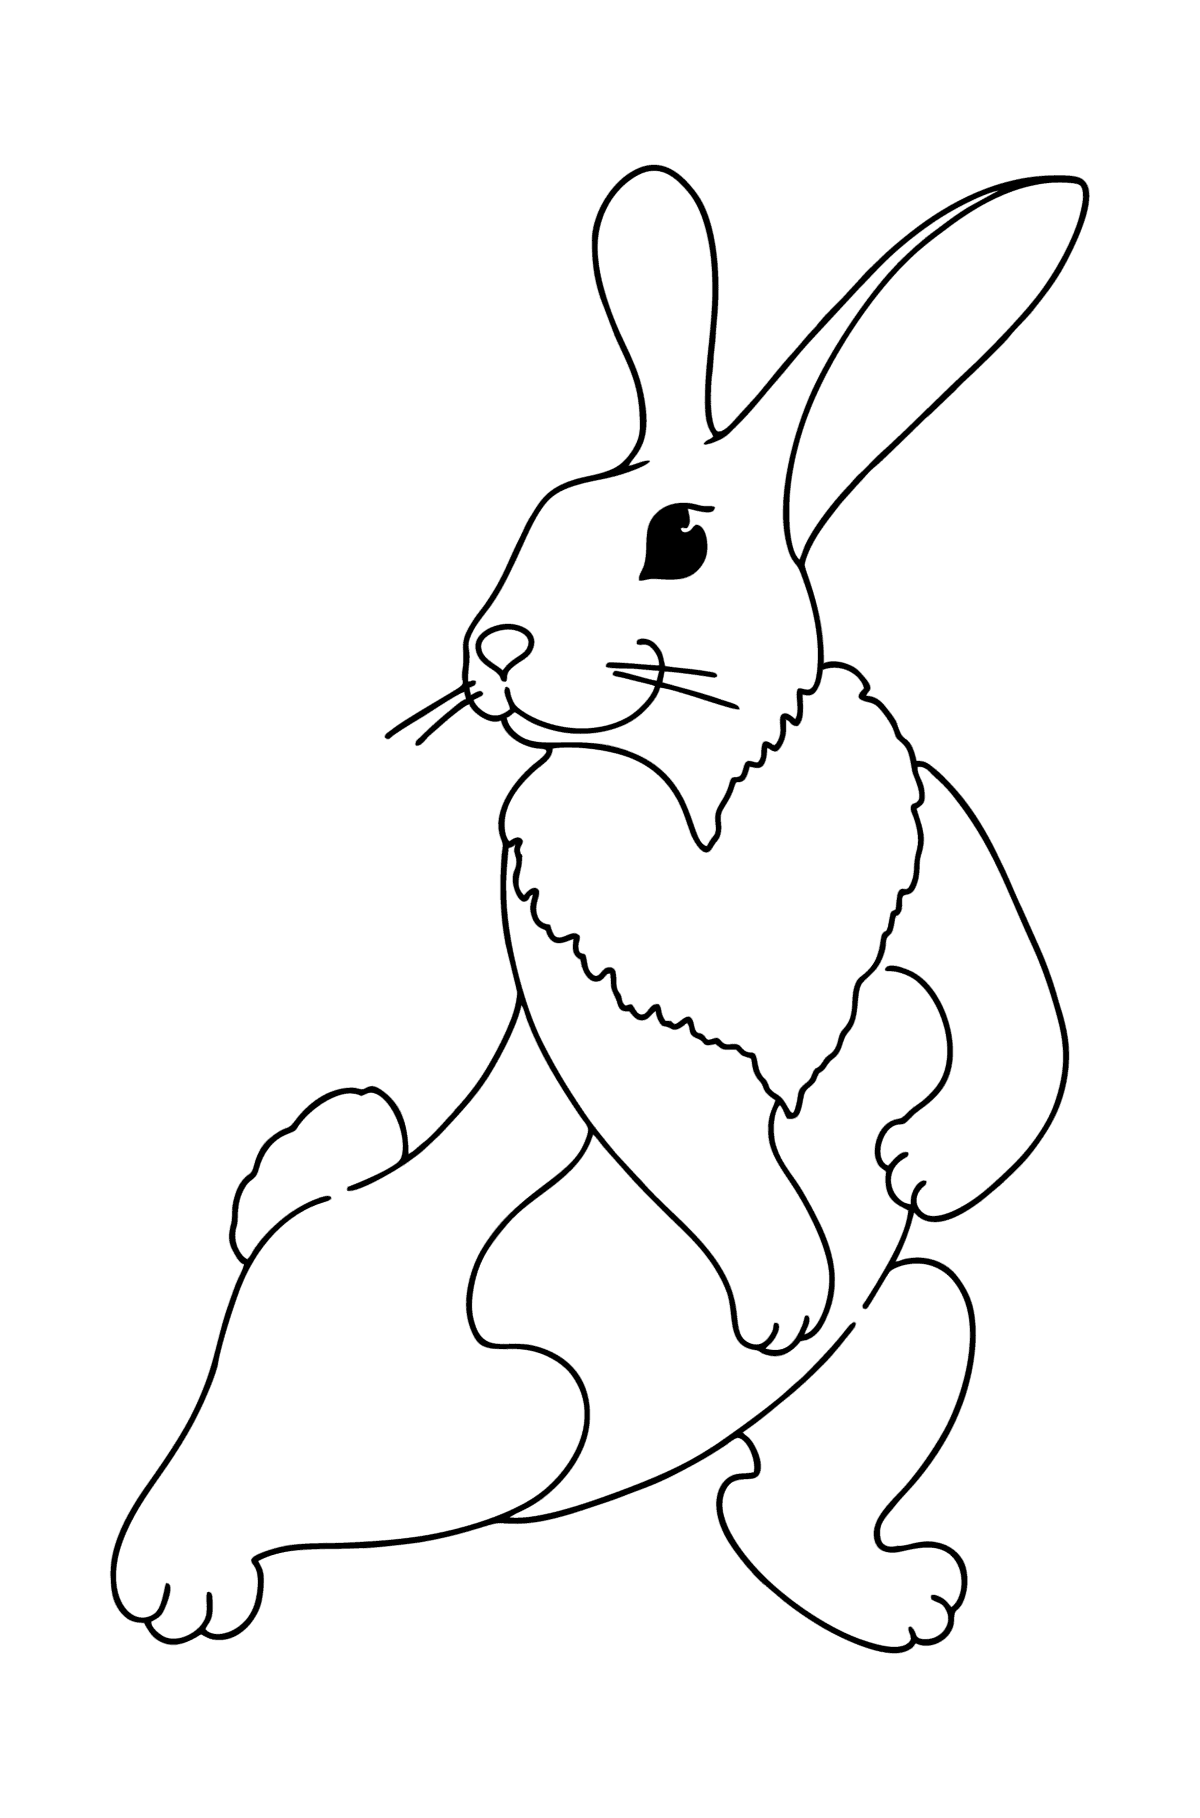 Playful Bunny coloring page - Coloring Pages for Kids